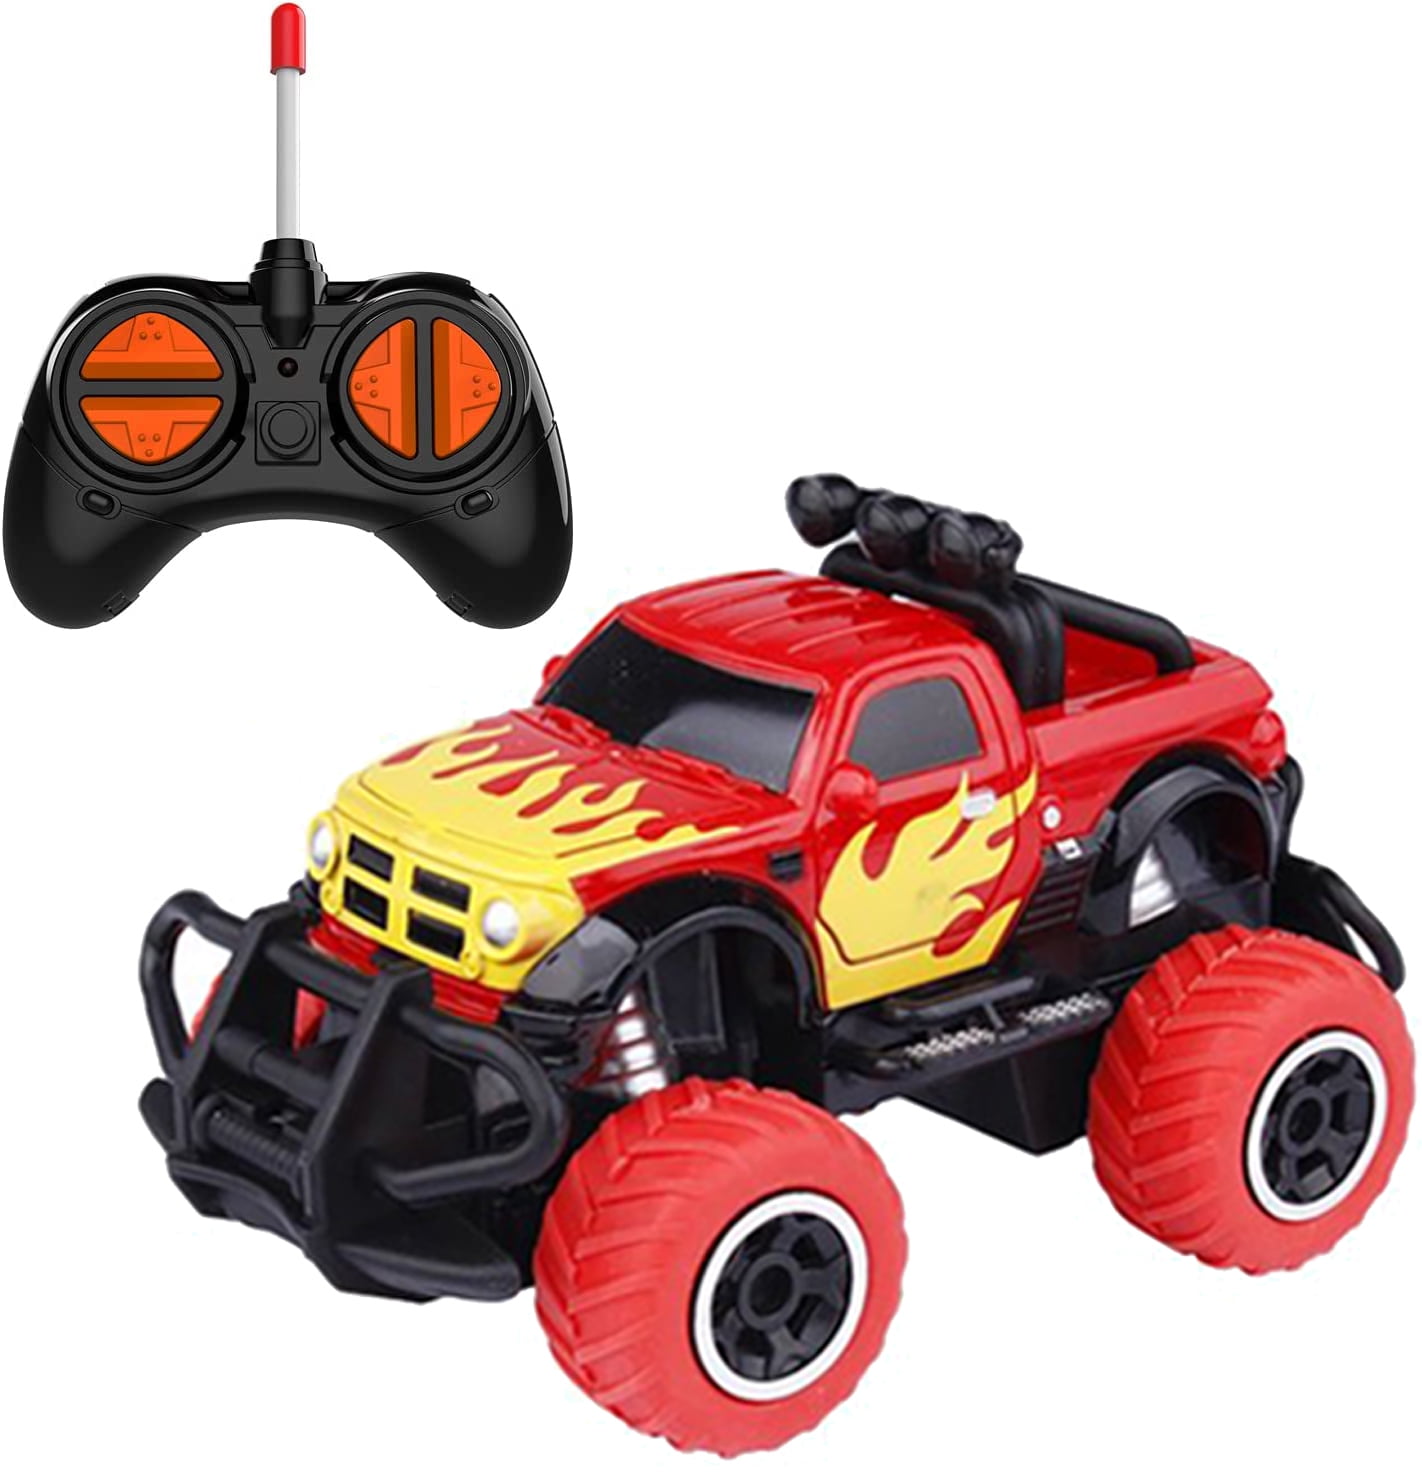 Dinosaur Toys for Kids 3-5,Monster Trucks for Boys,Toys for 3 4 5 6 Year Old Boys,4-Channel Off-Road RC Car,1/43 Scale Remote Control Car for Girls 3